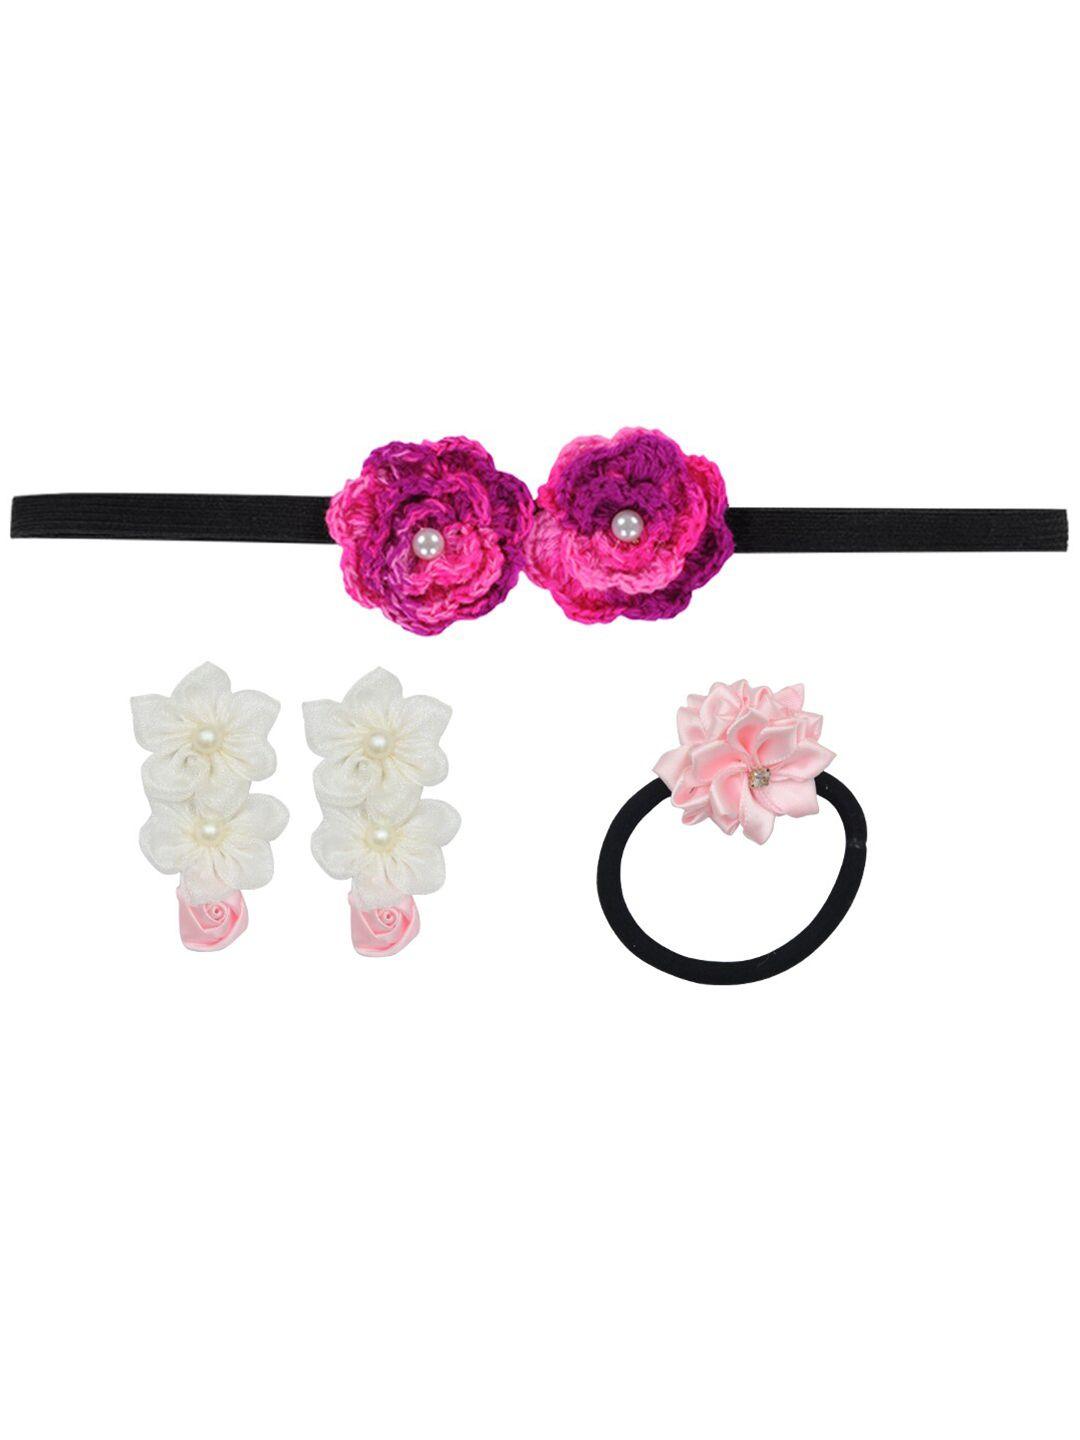 funkrafts-girls-set-of-4-lace-trendy-hair-accessories